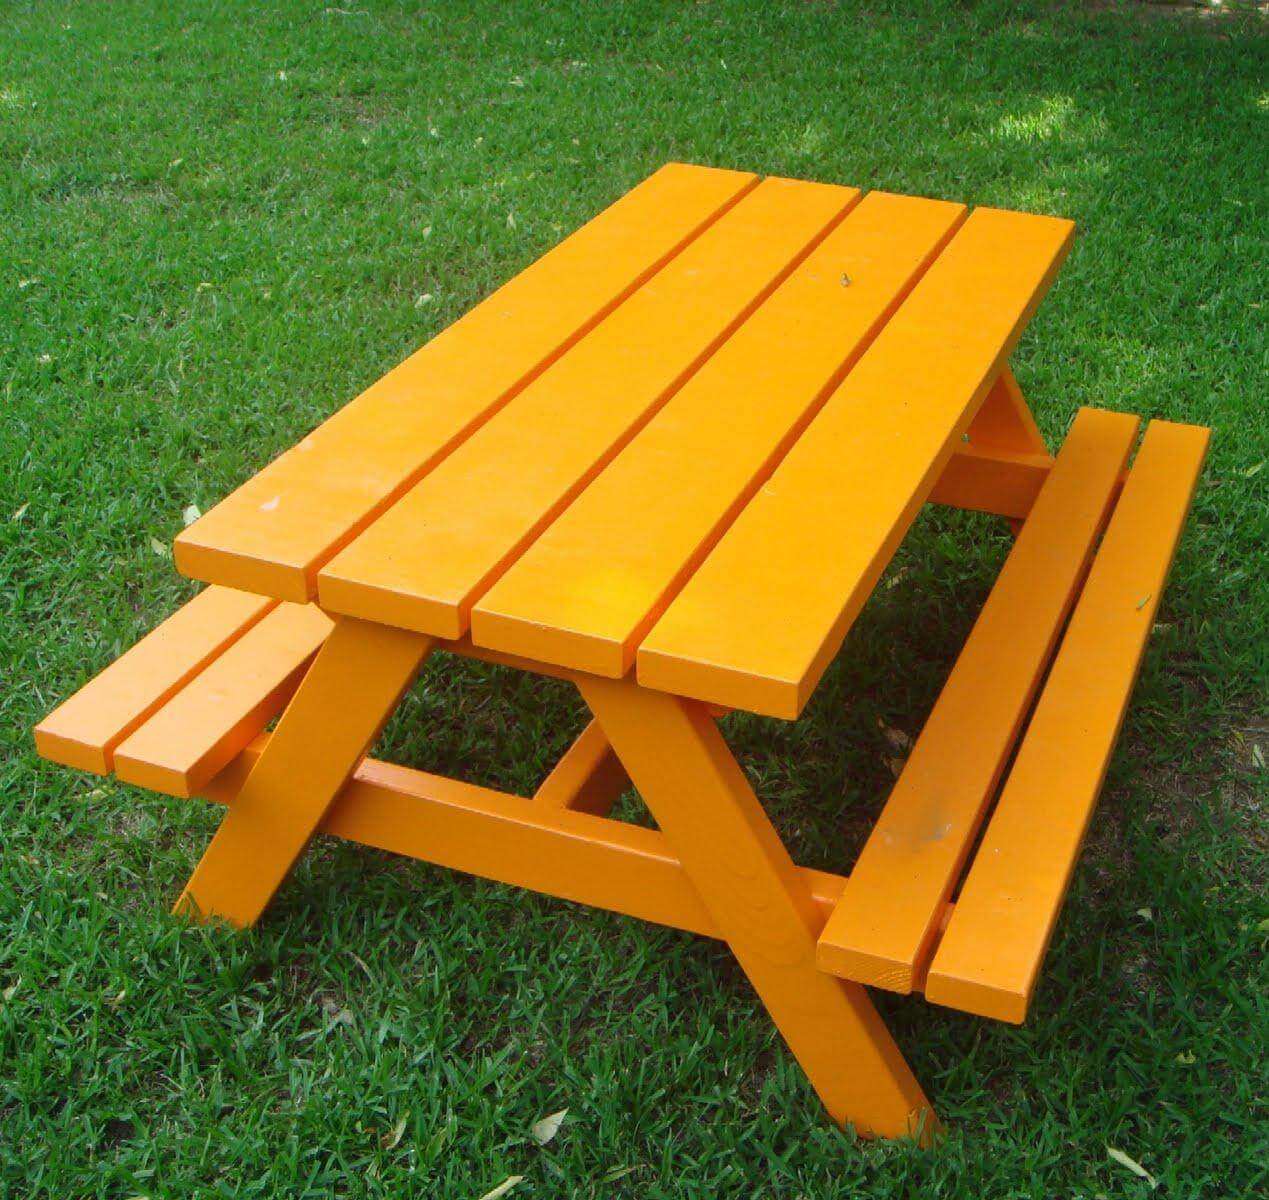 Larger Child-Sized Picnic Table Plans